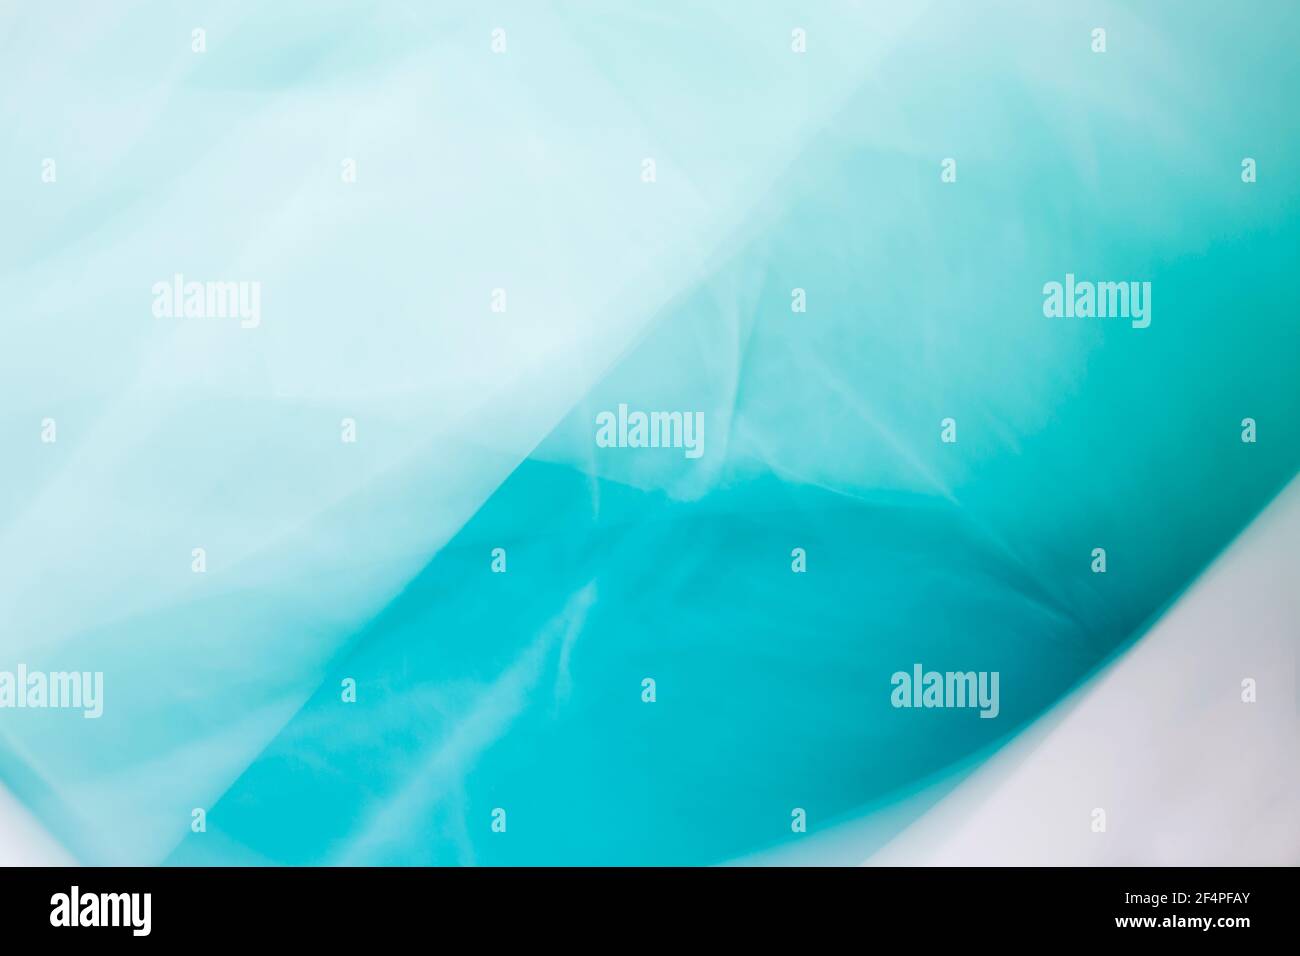 Contemporary abstract in white turquoise blue teal shades Stock Photo